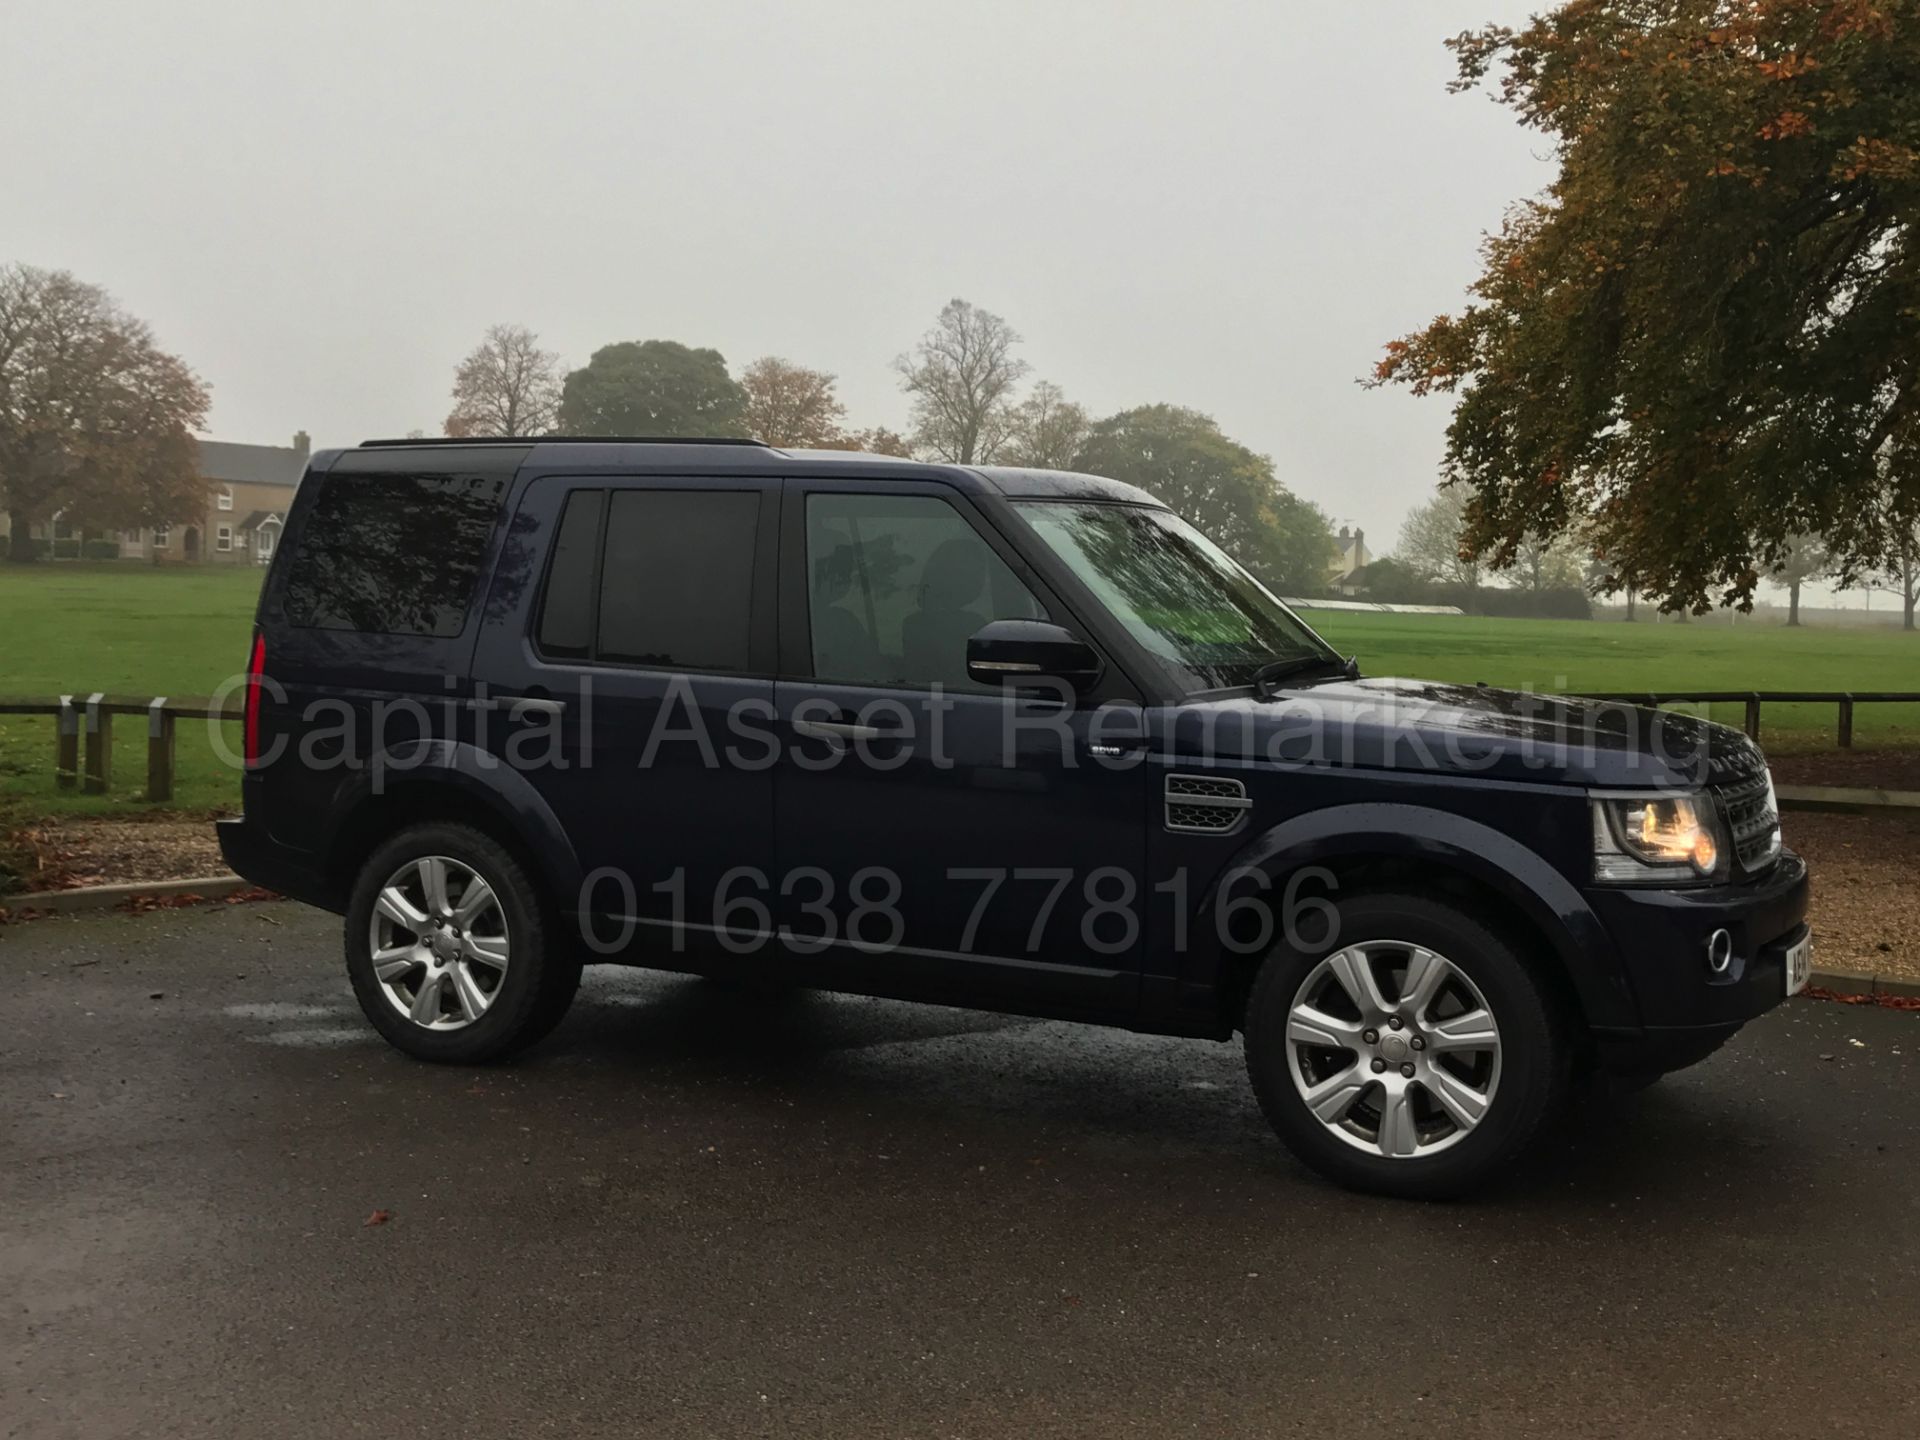 ON SALE LAND ROVER DISCOVERY 4 (2014) '3.0 SDV6 - 8 SPEED AUTO - LEATHER - SAT NAV -7 SEATER'1 OWNER - Image 10 of 41